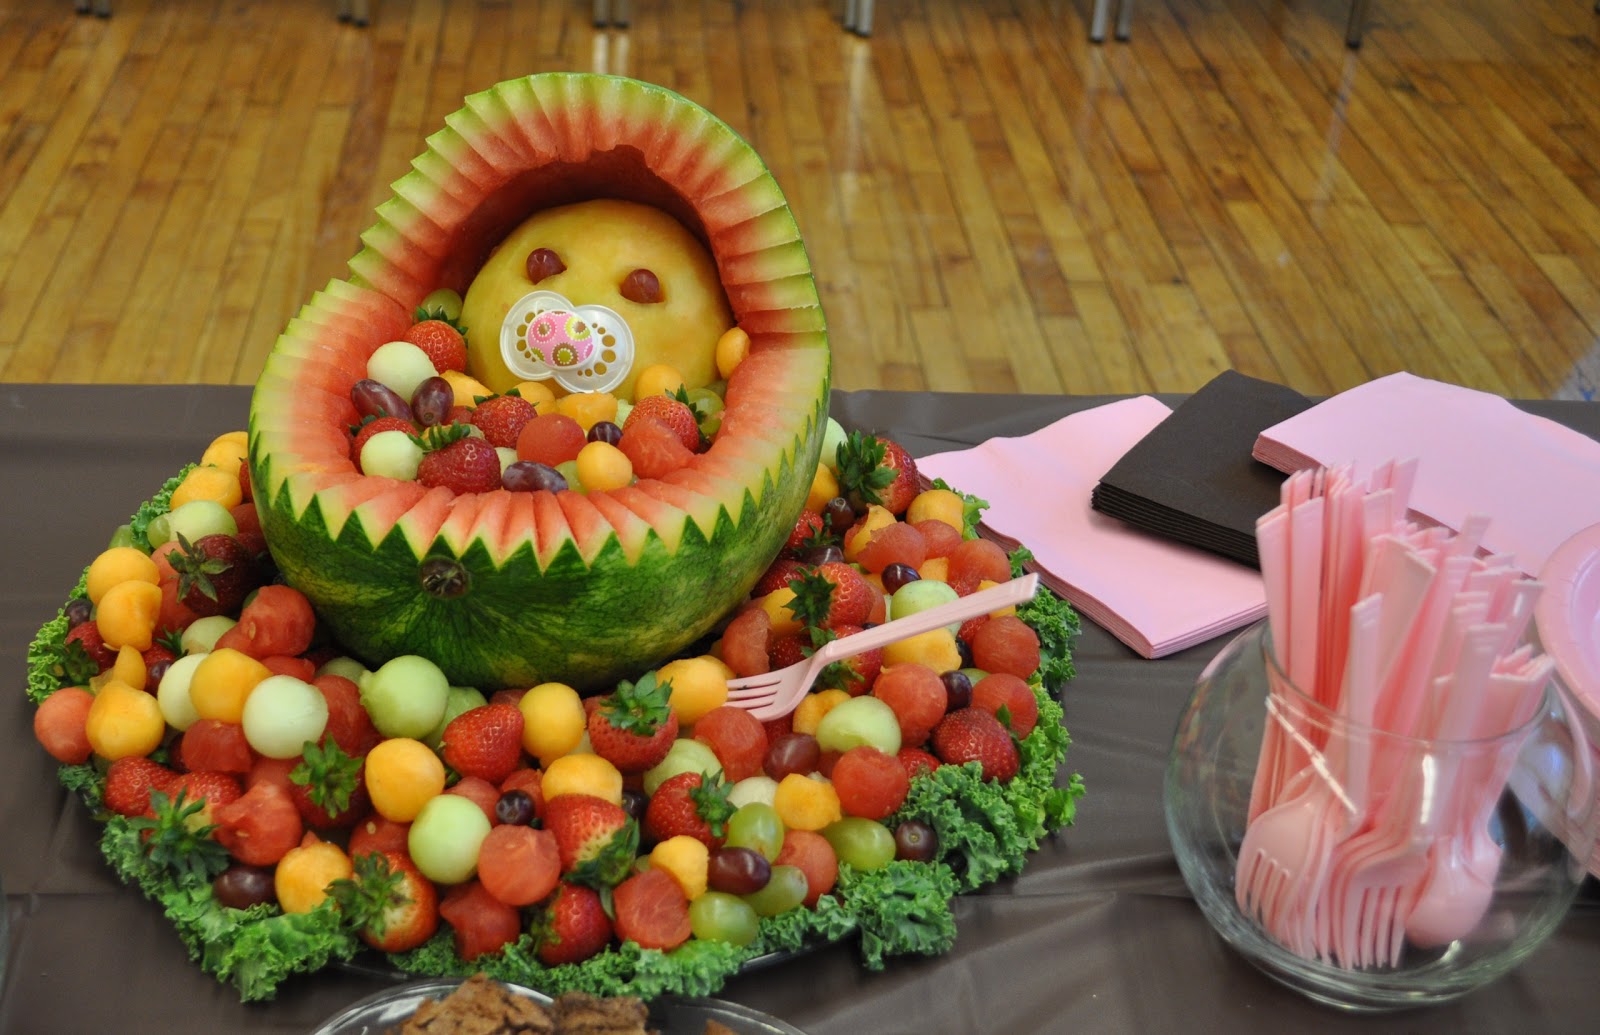 cool easy cake decorating ideas Yep, there is a 'baby' in that watermelon!